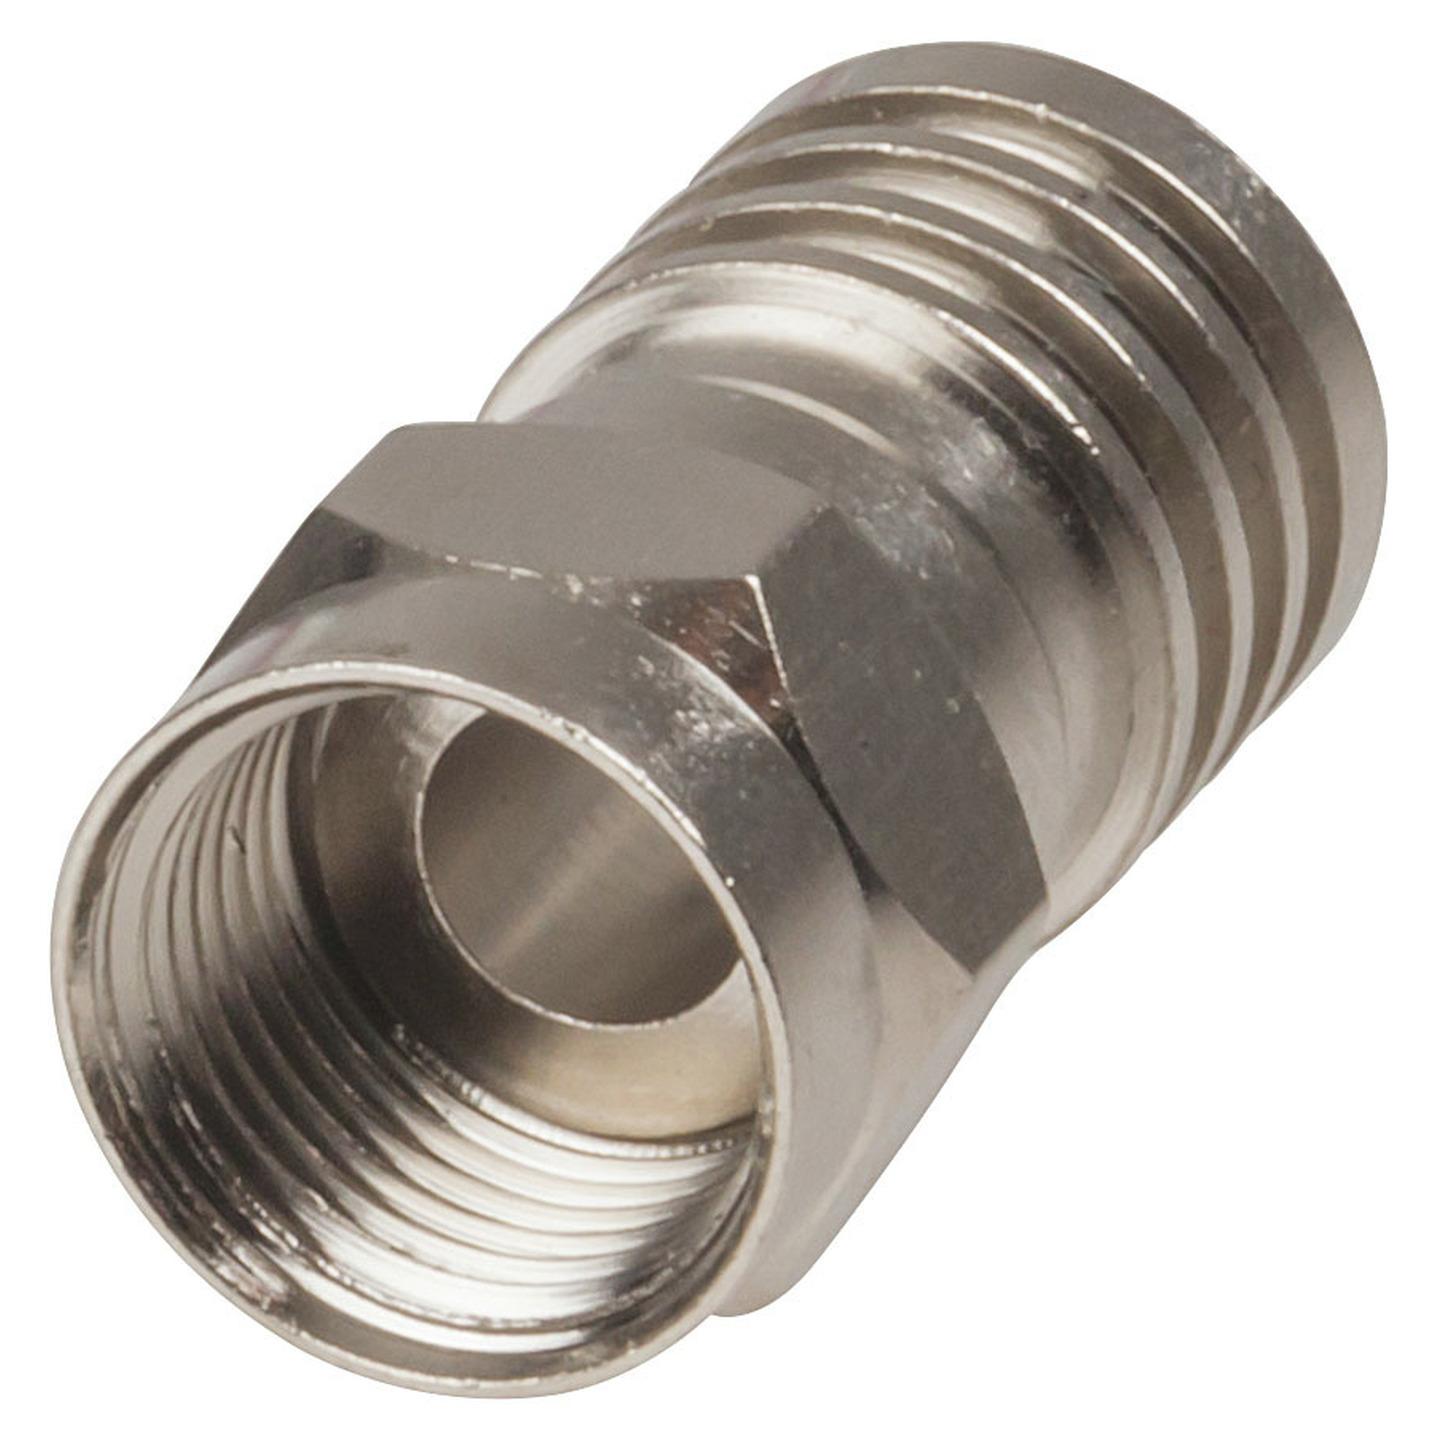 F59 Crimp Connector for RG6 Cable Heavy Gauge